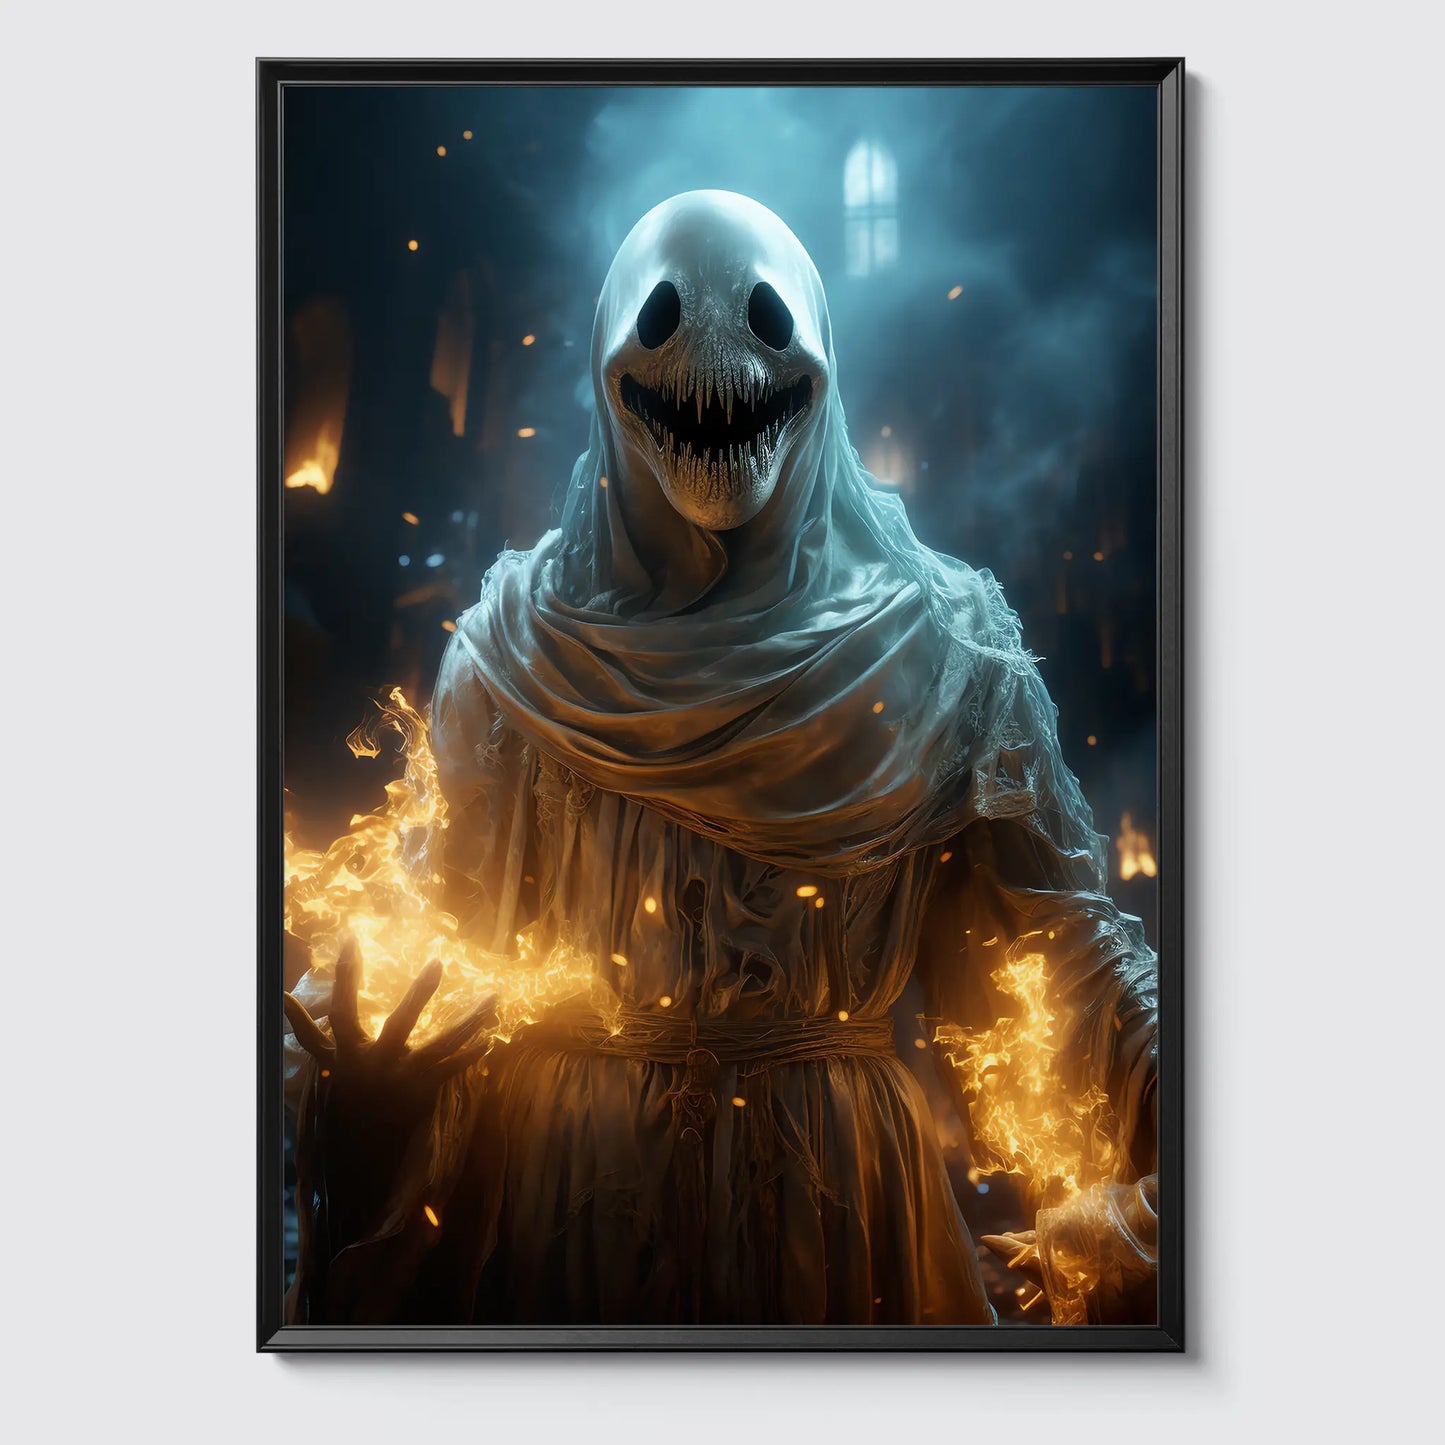 Grinning Ghost No 1 - Halloween - Poster